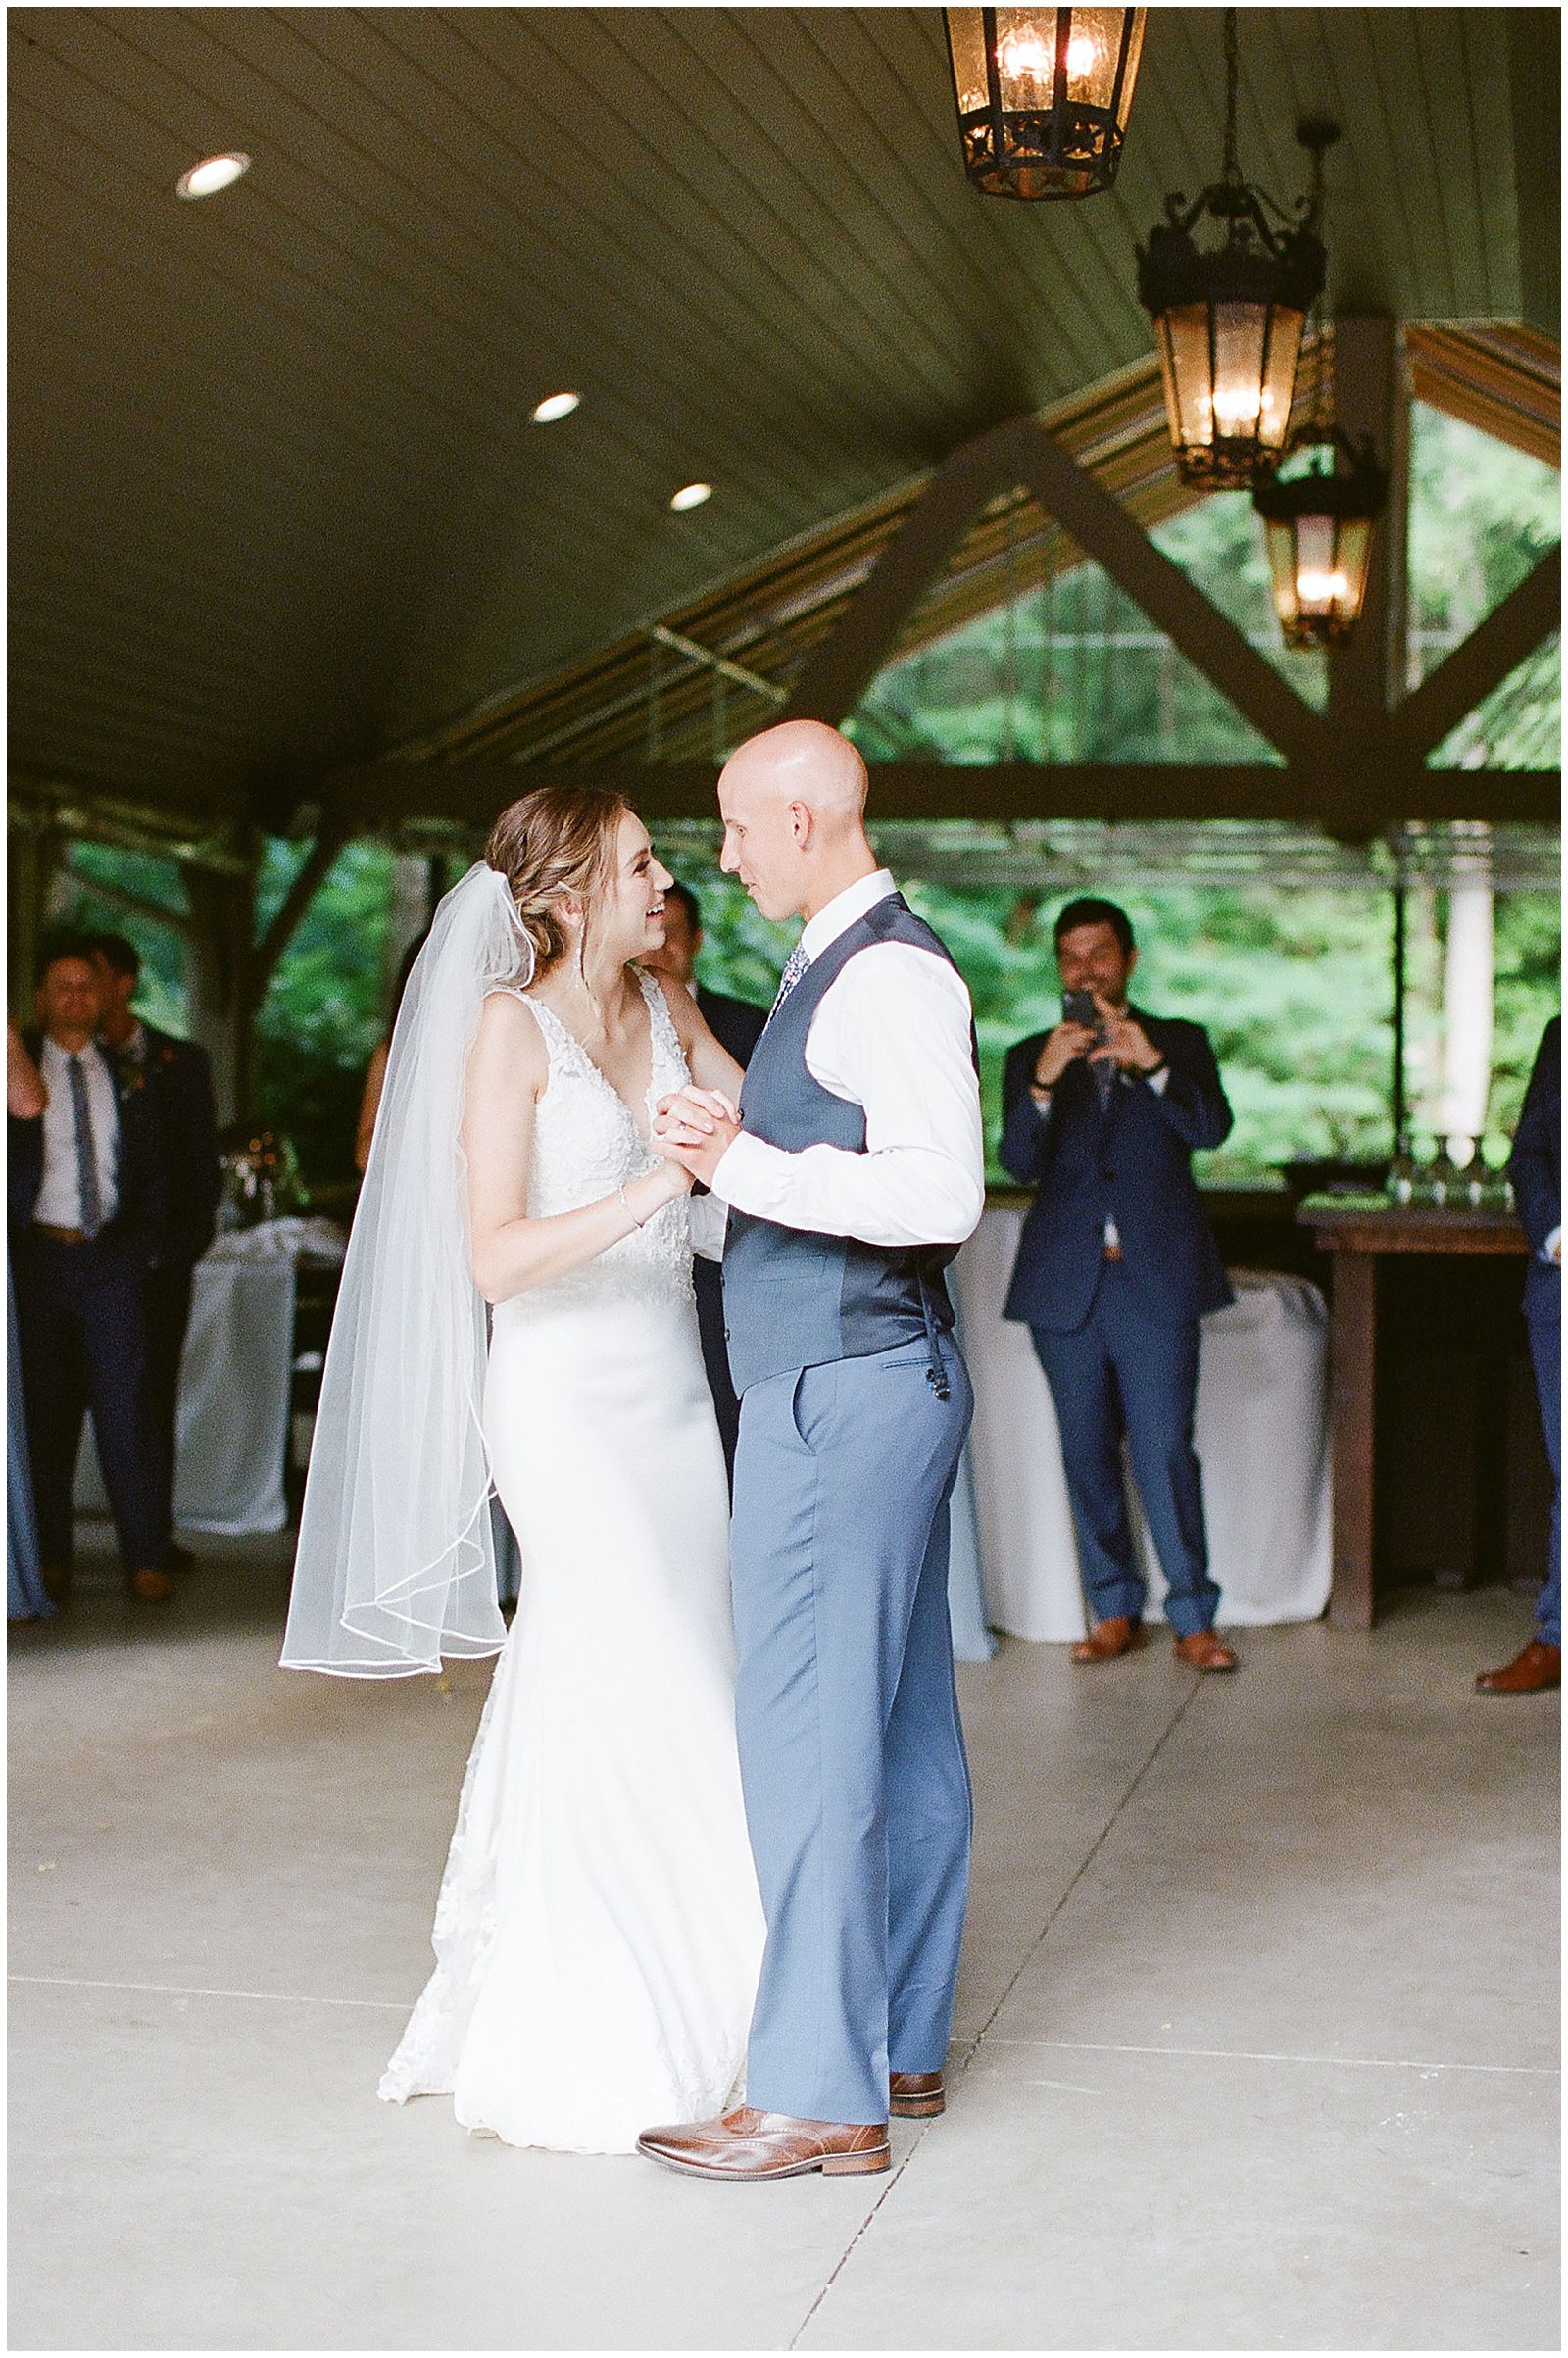 Bride and Groom Laughing First Dance at Reception Photo